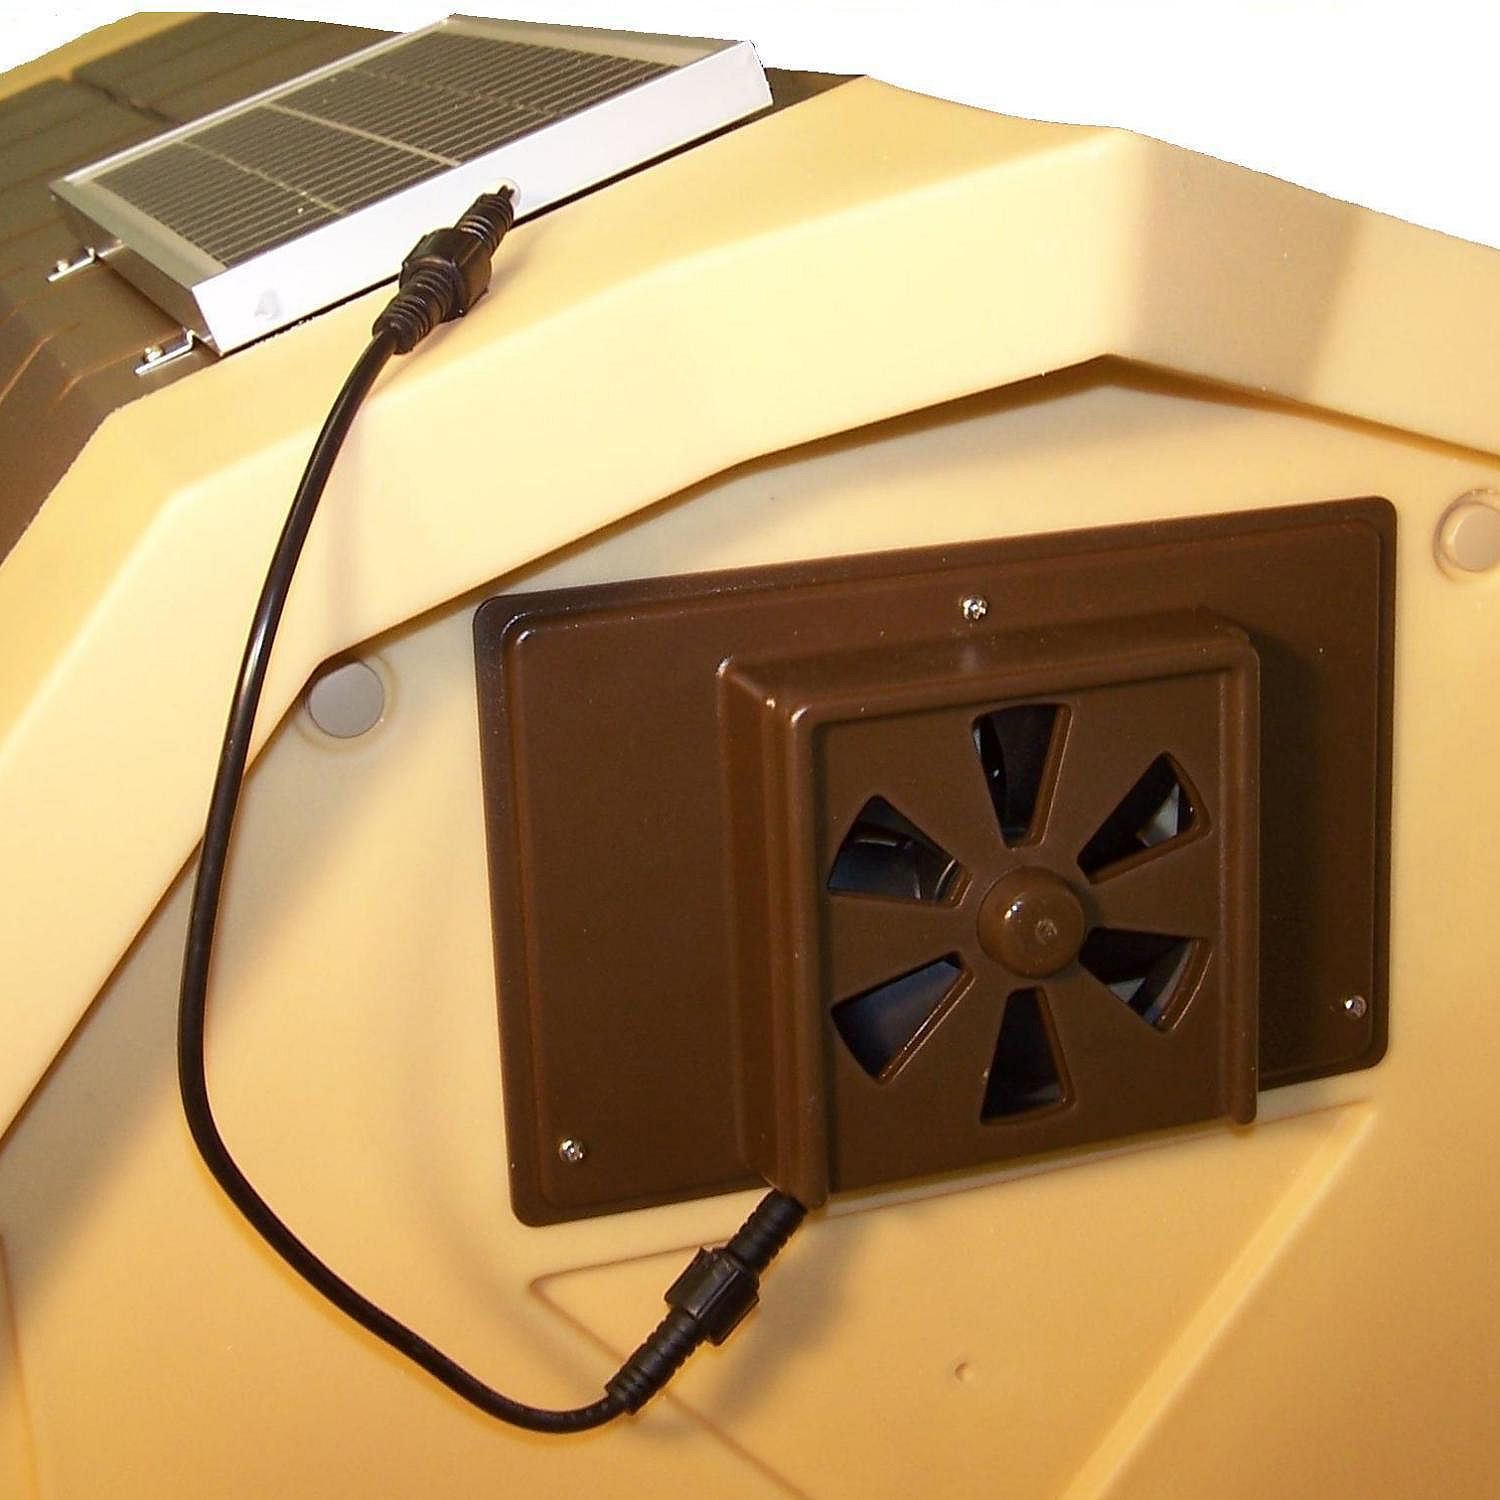 Details about Dog House Solar Powered Exhaust Fan - 9.5" x 6.5"